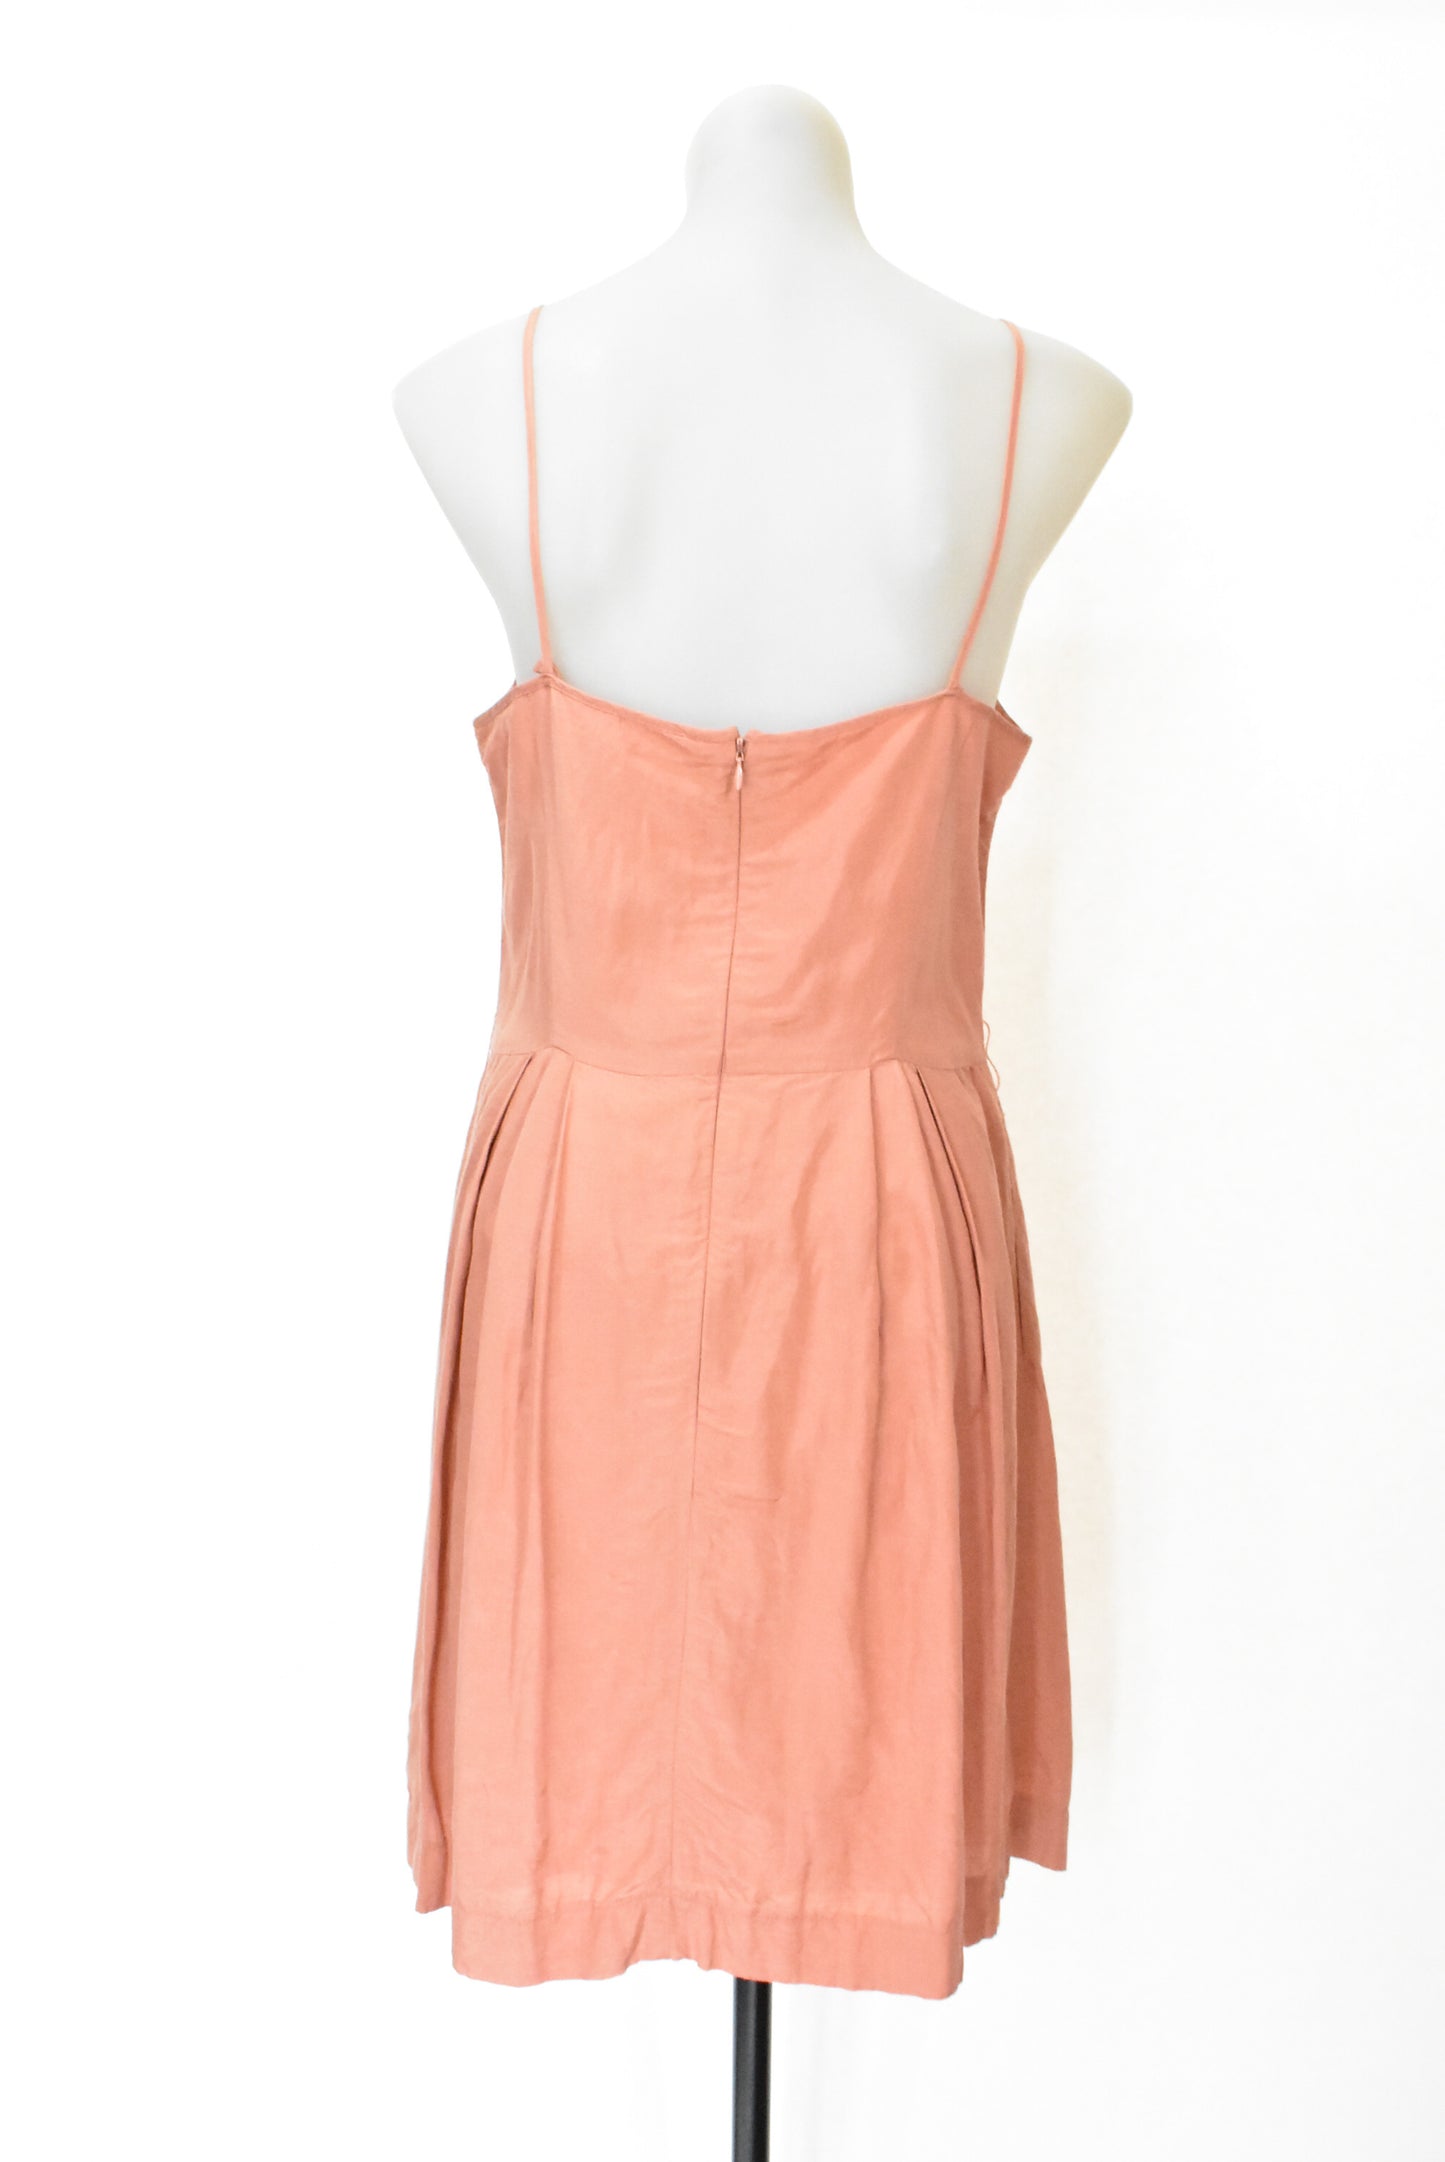 Cue linen blend strappy dress with pockets, 12